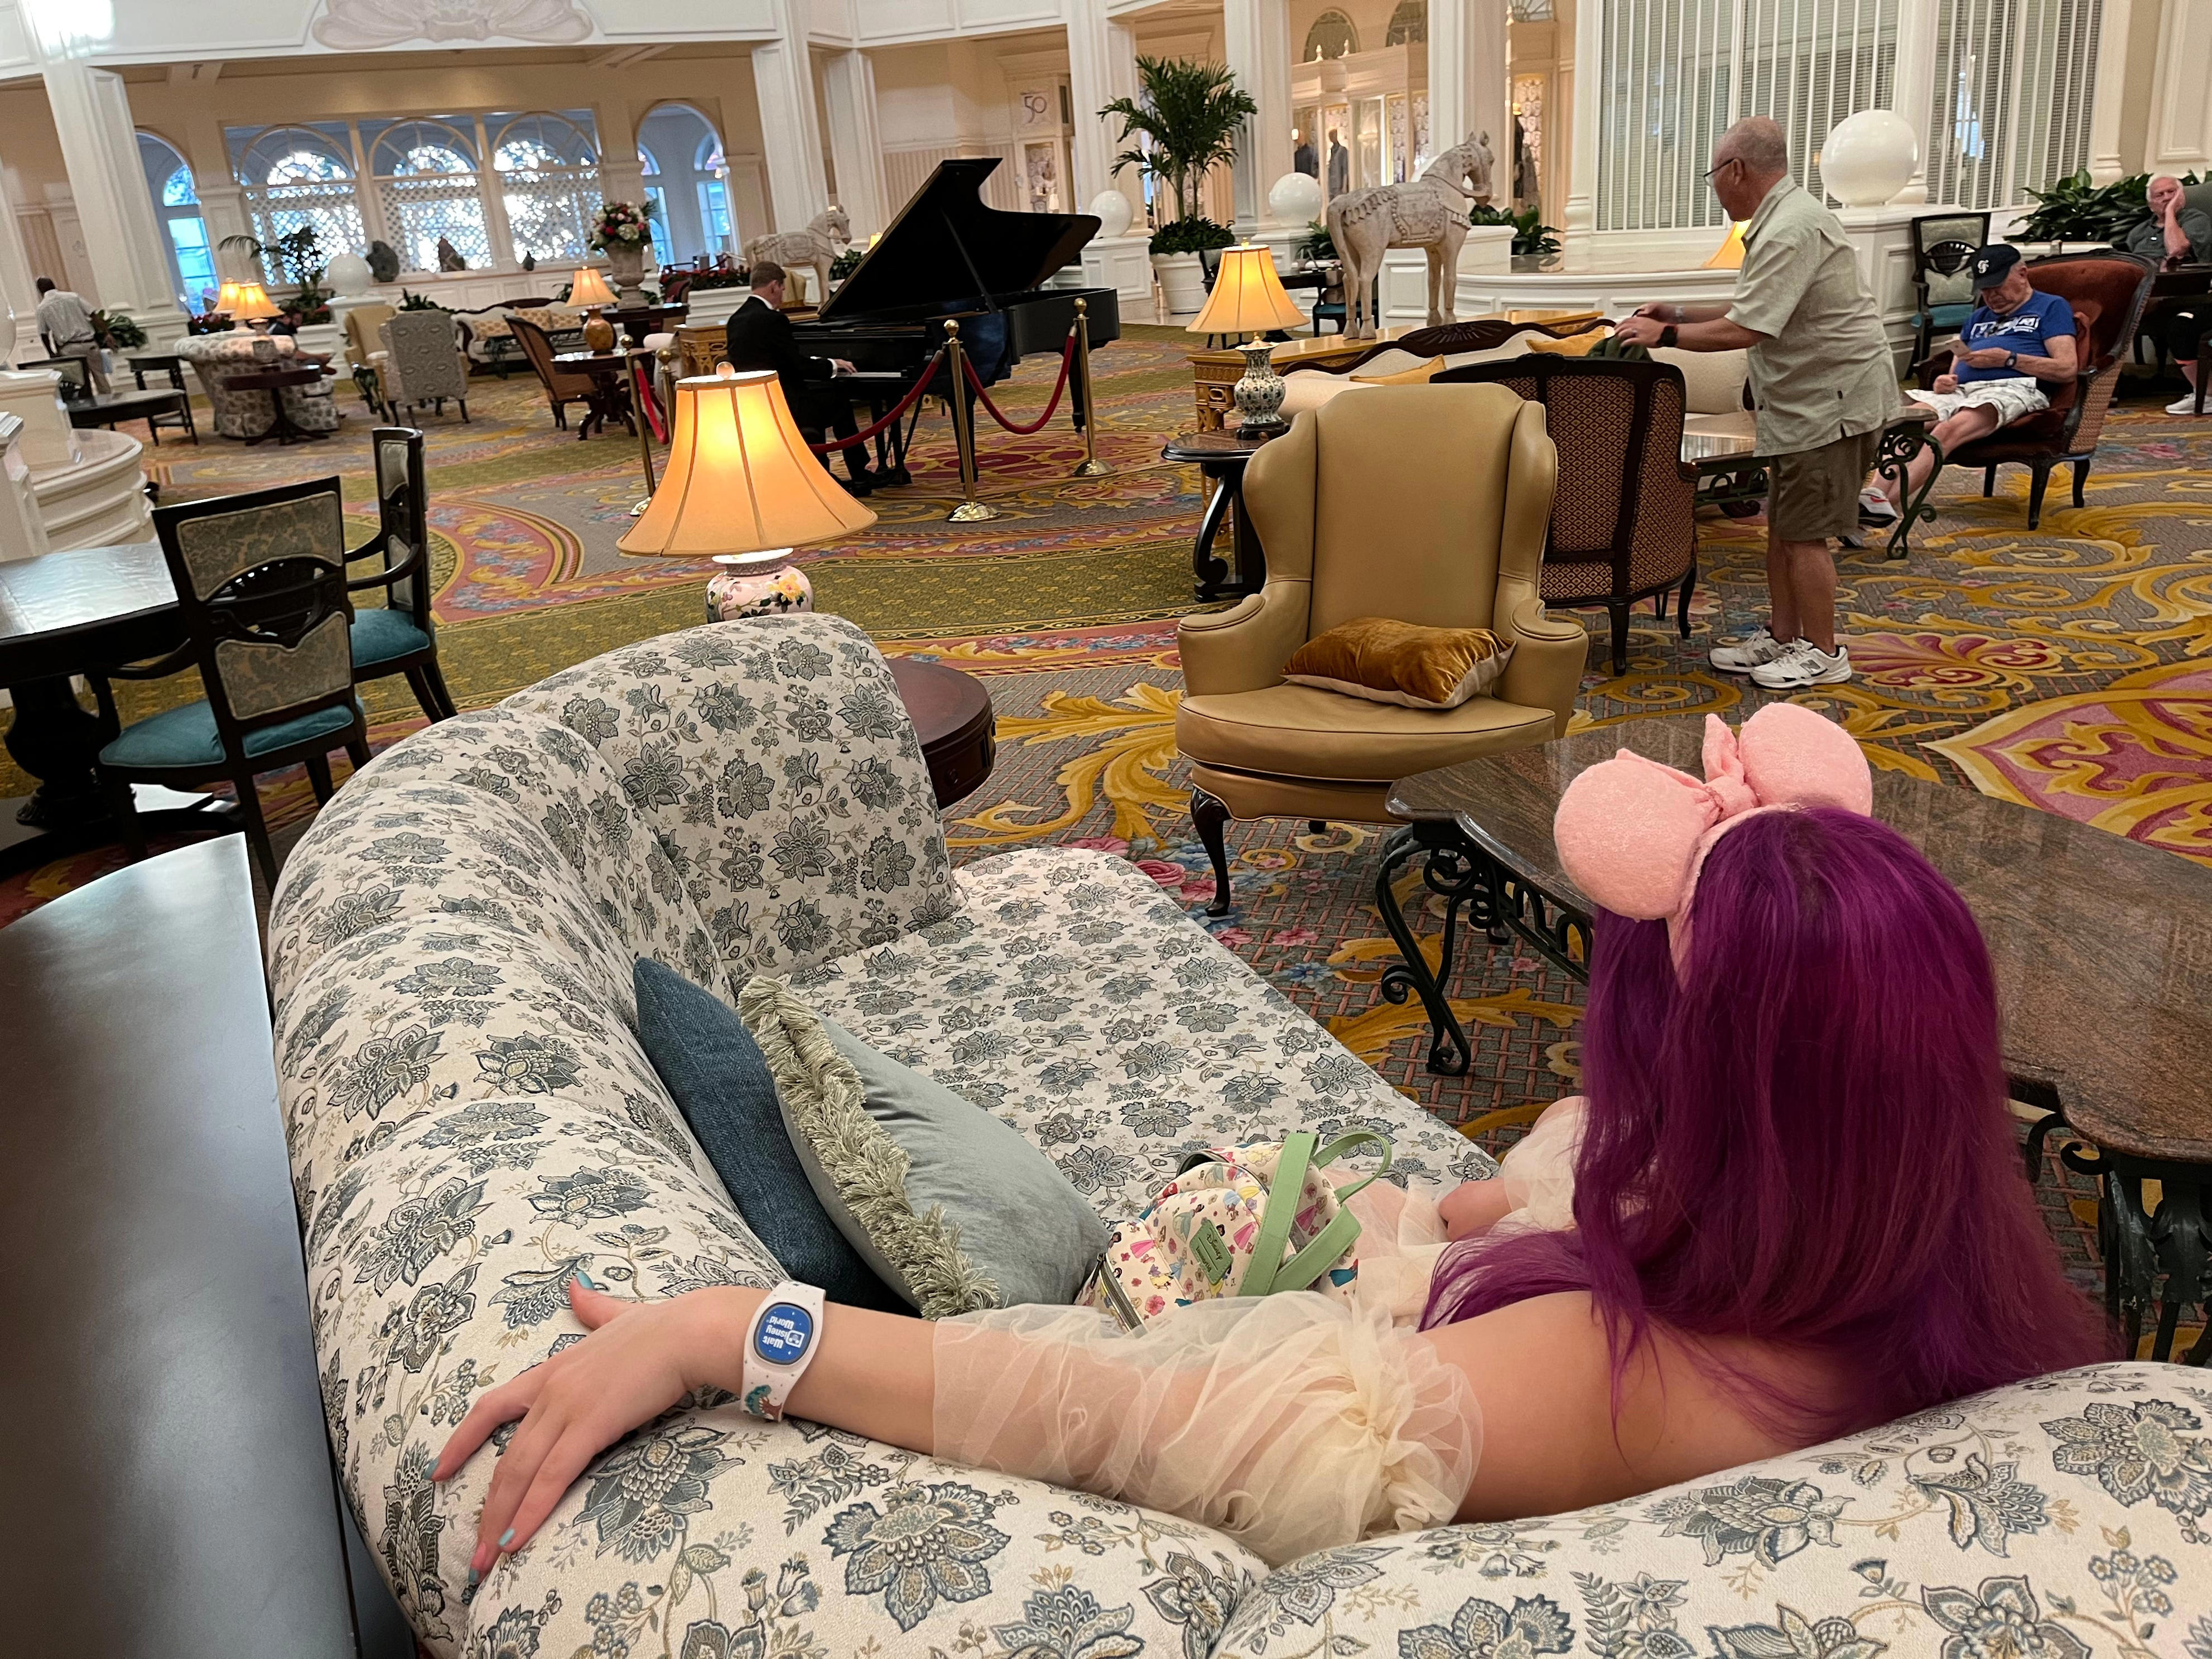 <p>One of my favorite parts of my stay was watching and listening to the pianist play Disney classics for the guests in the lobby. </p><p>I liked that he played a lot of songs from "Alice in Wonderland" since the movie is present in the resort's theming. </p>